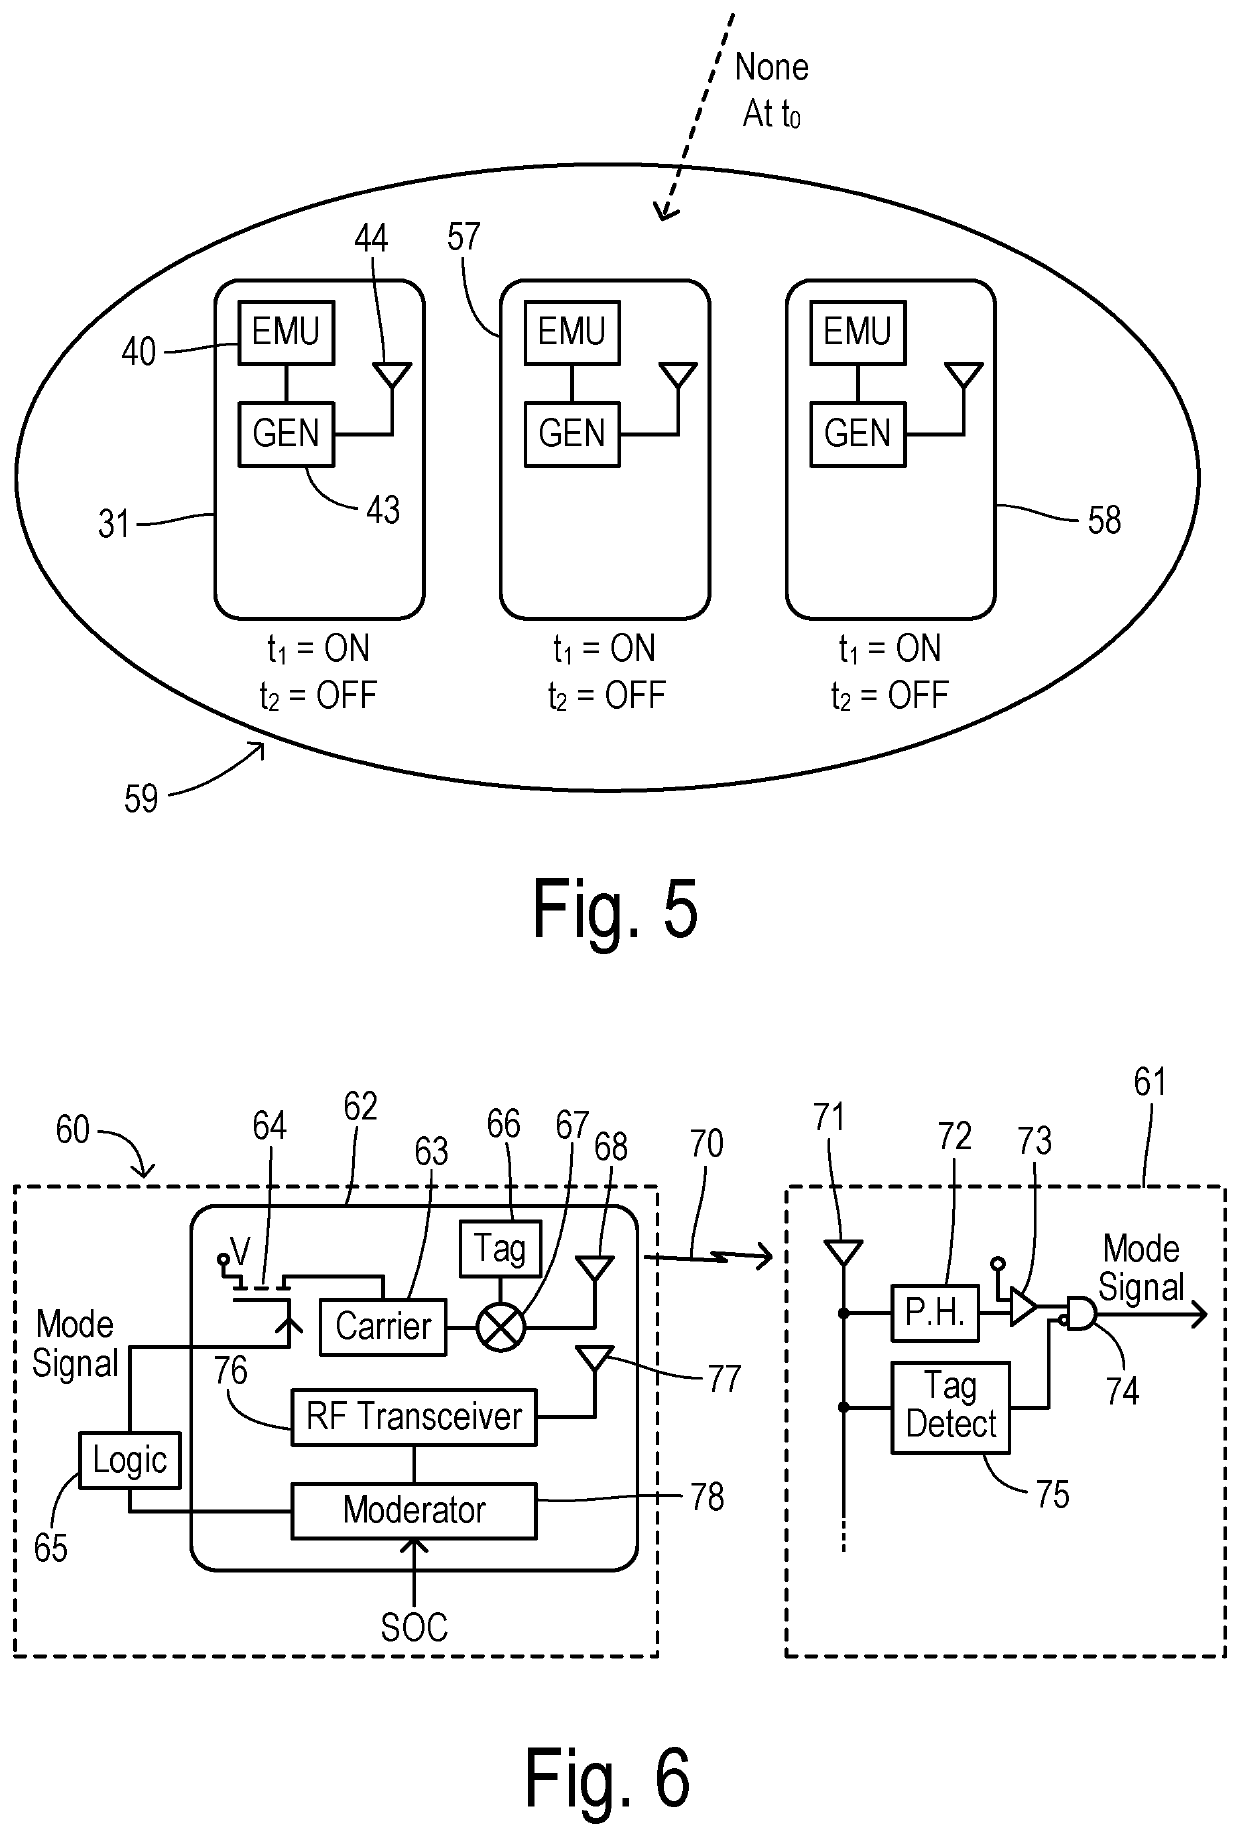 Ambient RF backscatter communication for vehicle remote control